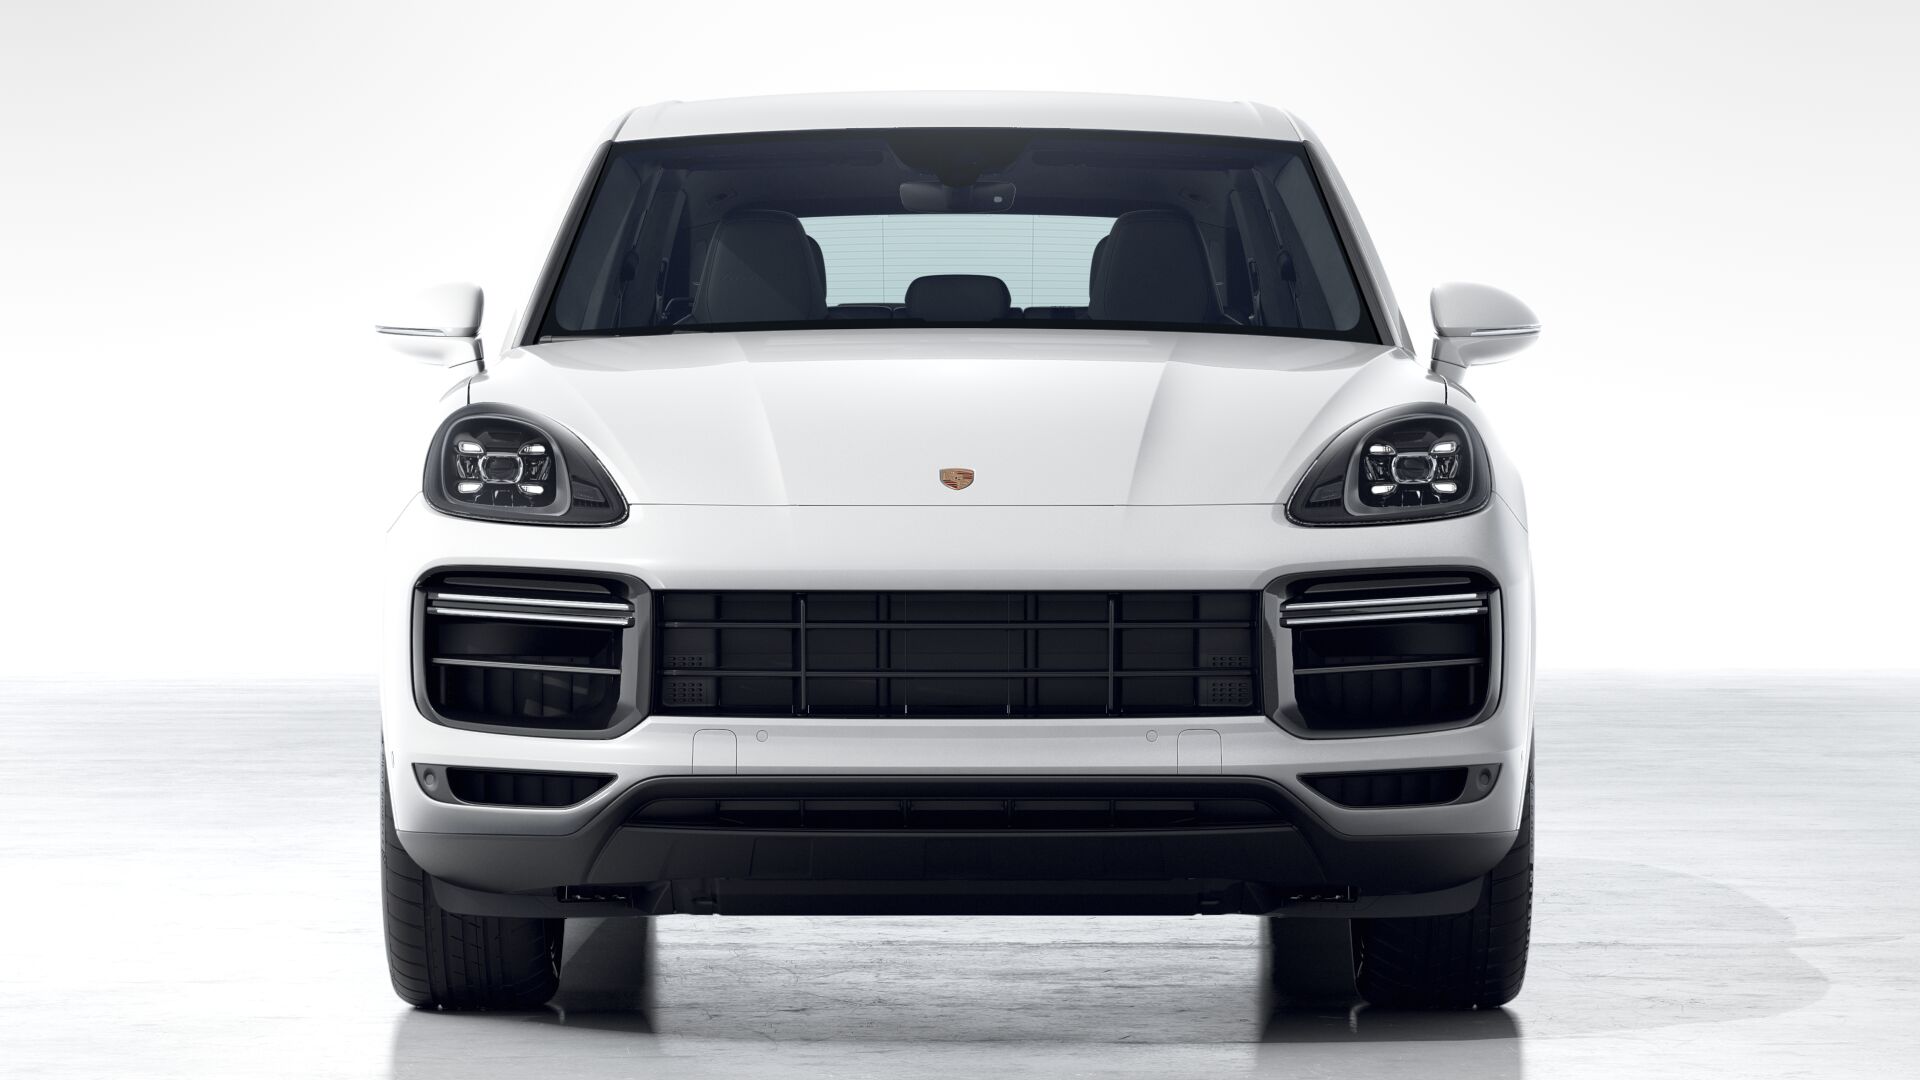 Exterior view of Cayenne Turbo S E-Hybrid